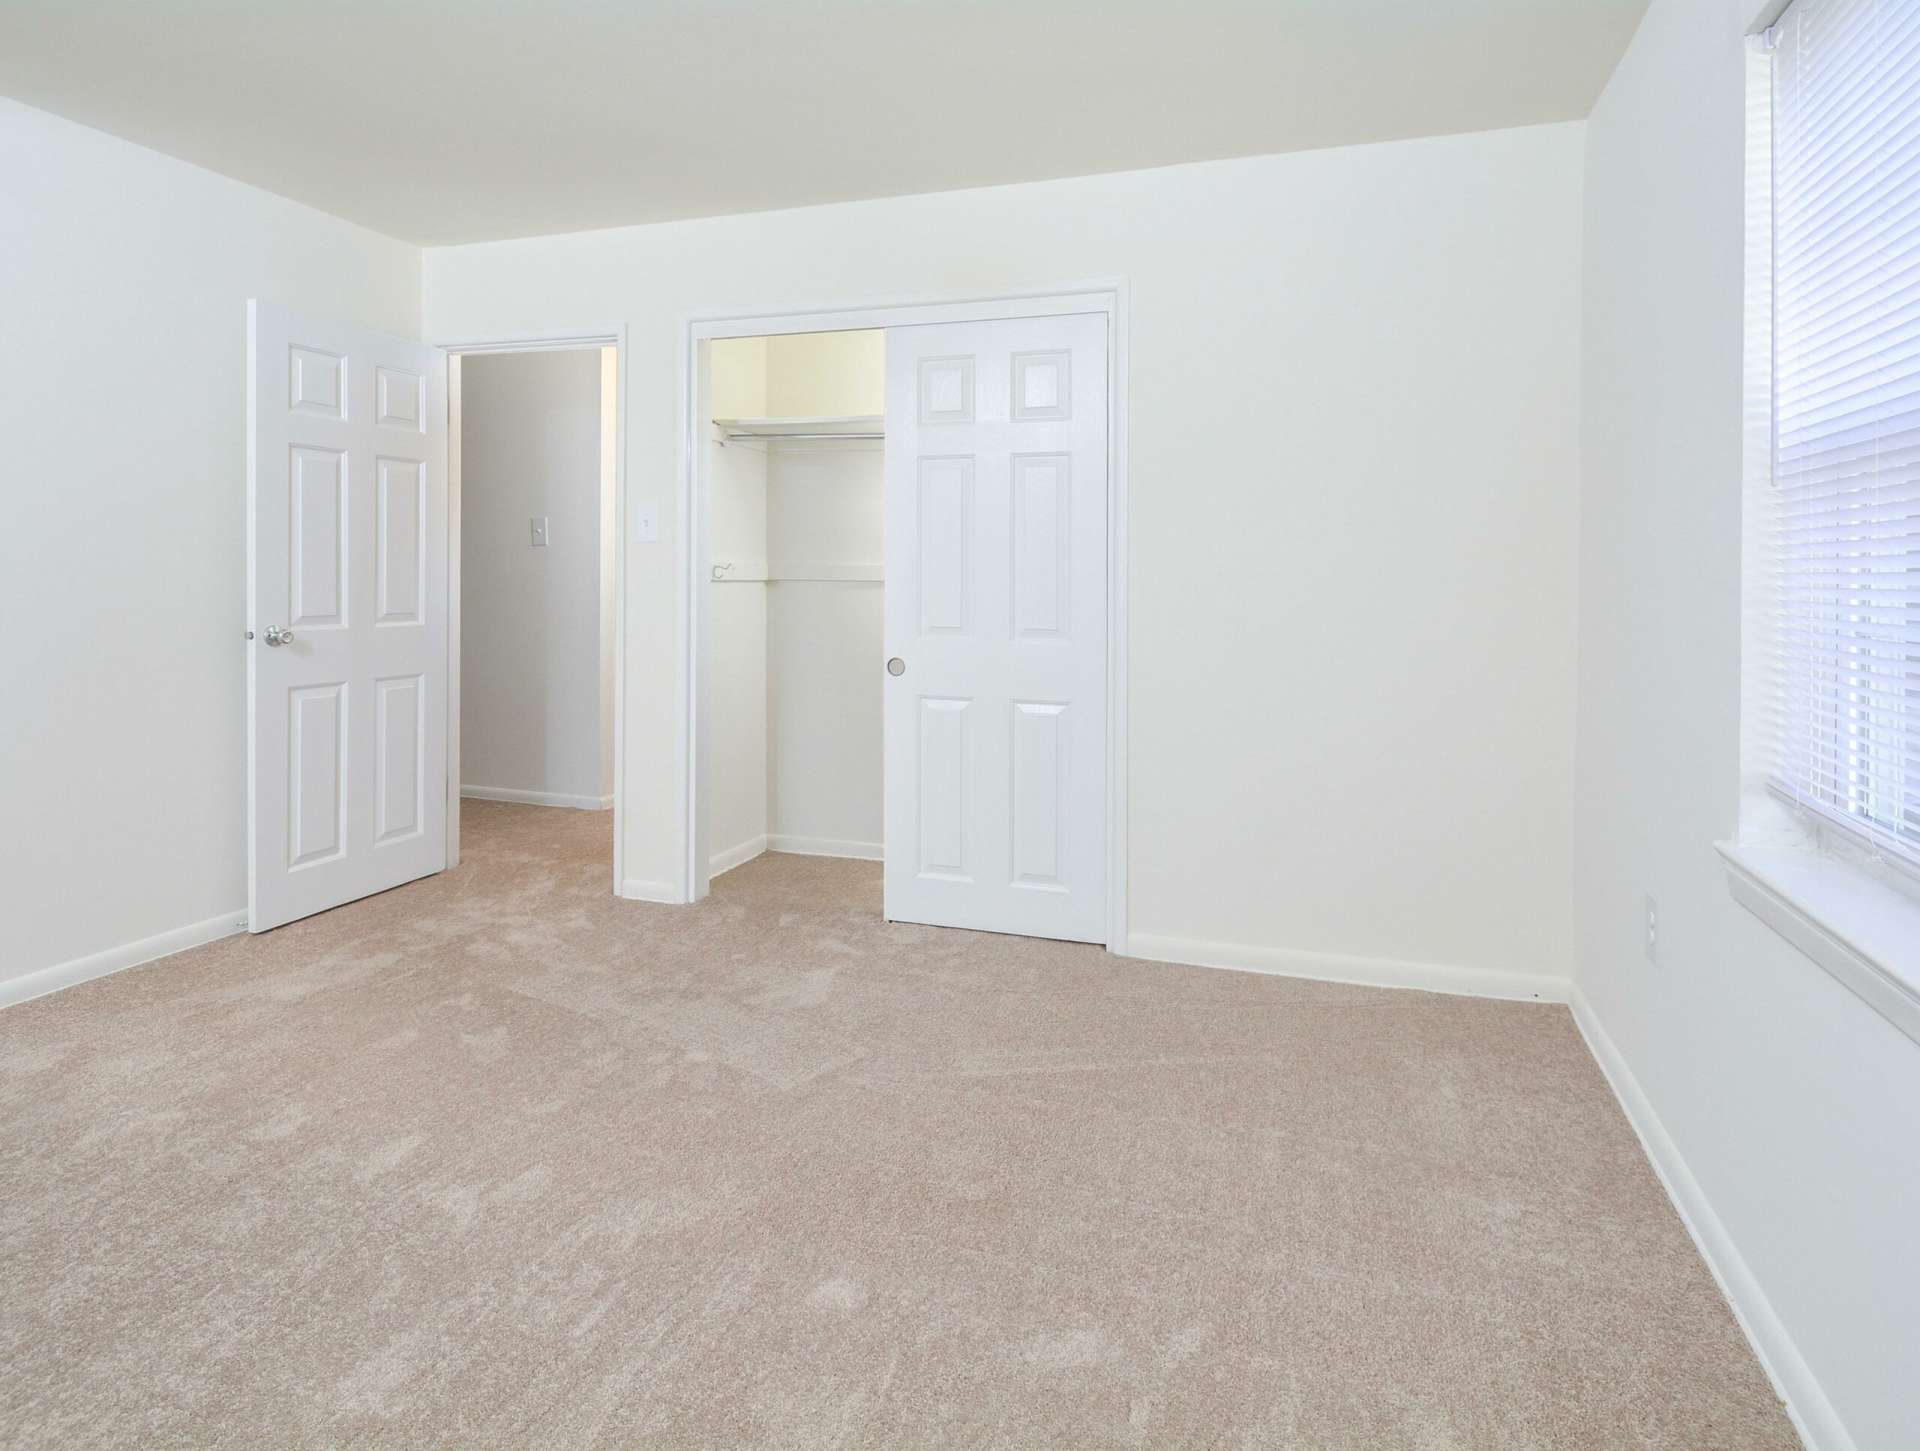 Carpeted bedroom with sliding closet doors and a window.